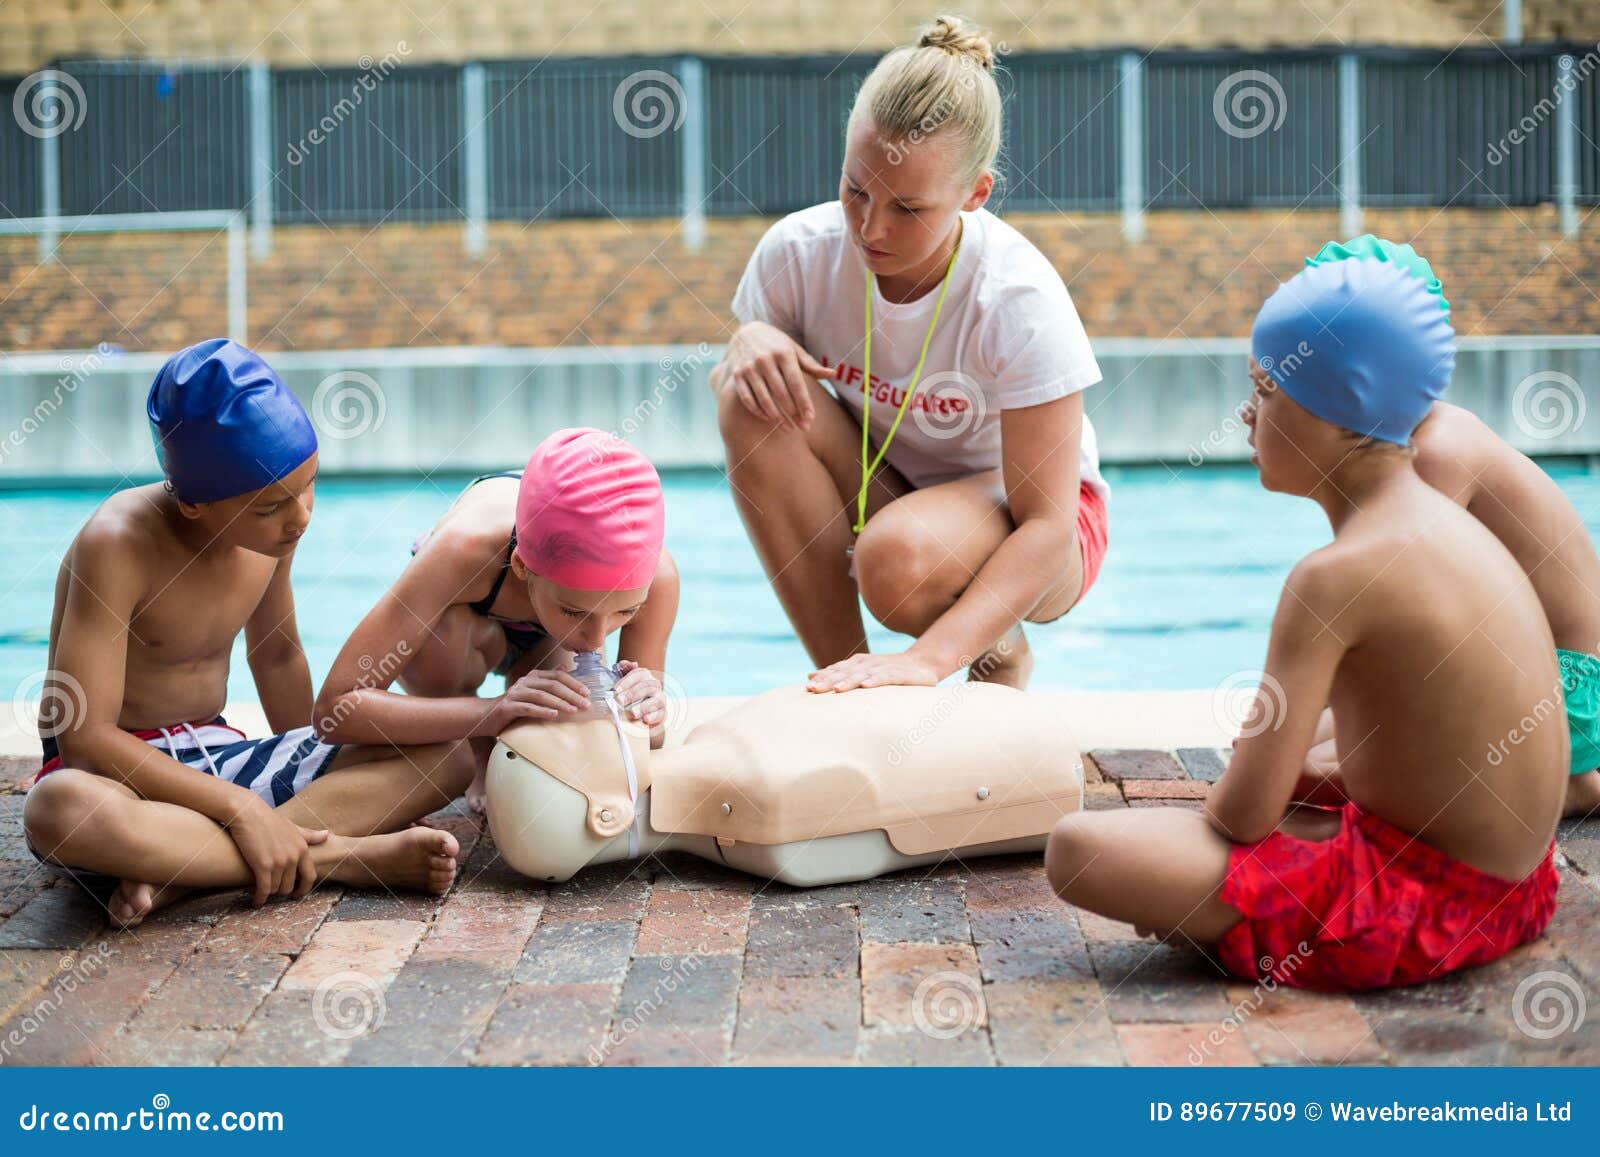 lifeguard helping children during rescue training